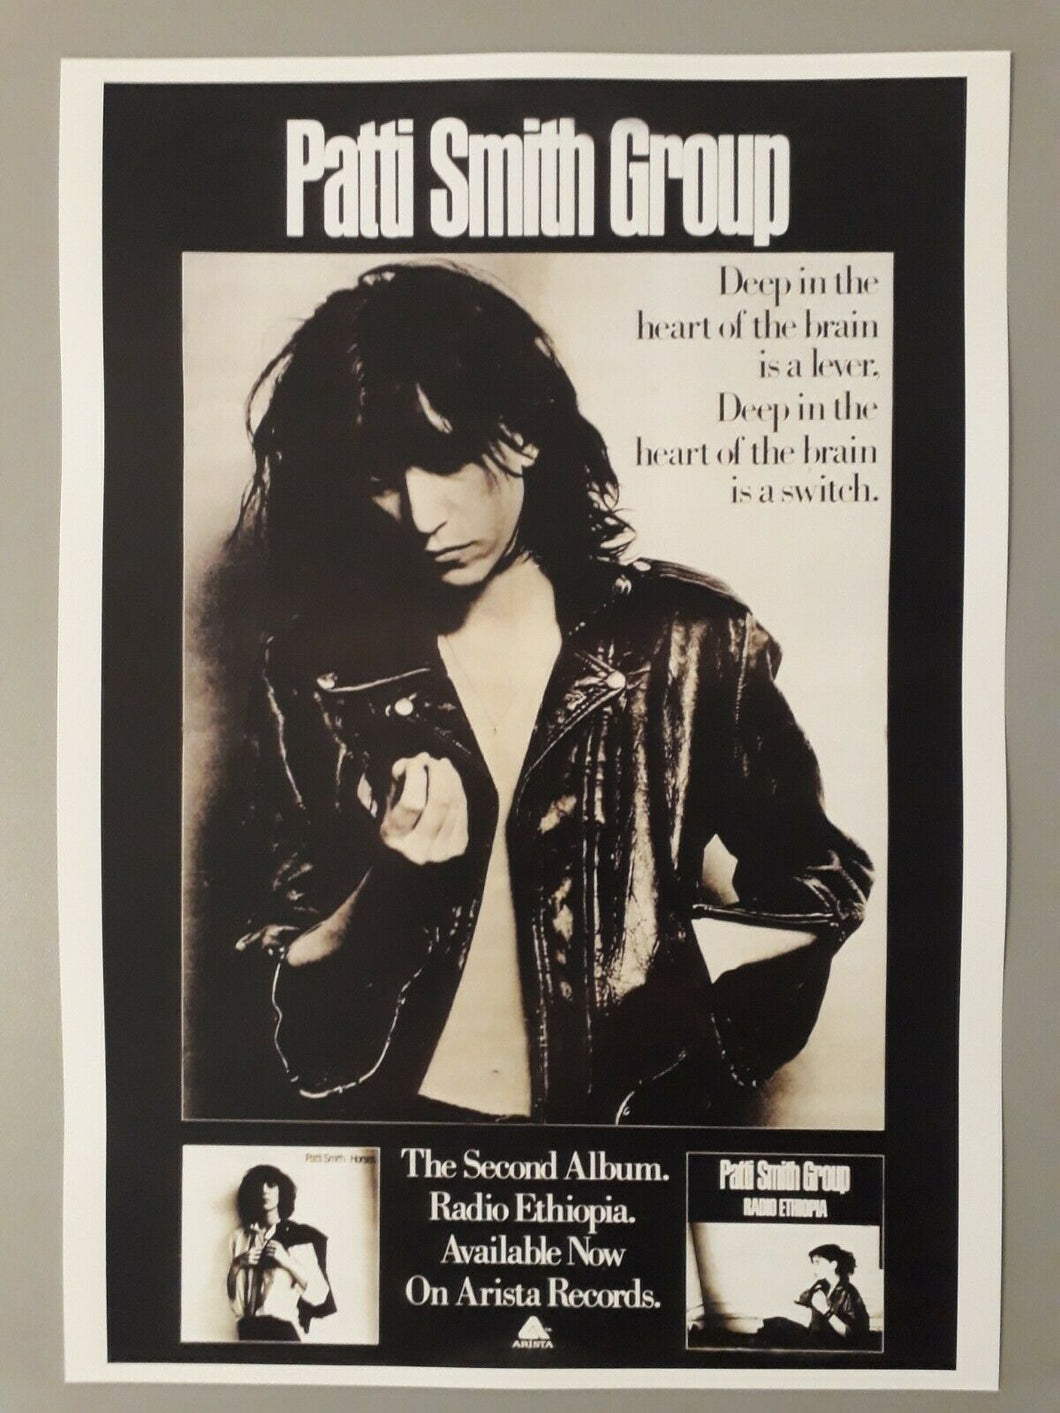 Patti Smith poster - Radio Ethiopia 1976 promotional A3 size reprint - Original Music and Movie Posters for sale from Bamalama - Online Poster Store UK London